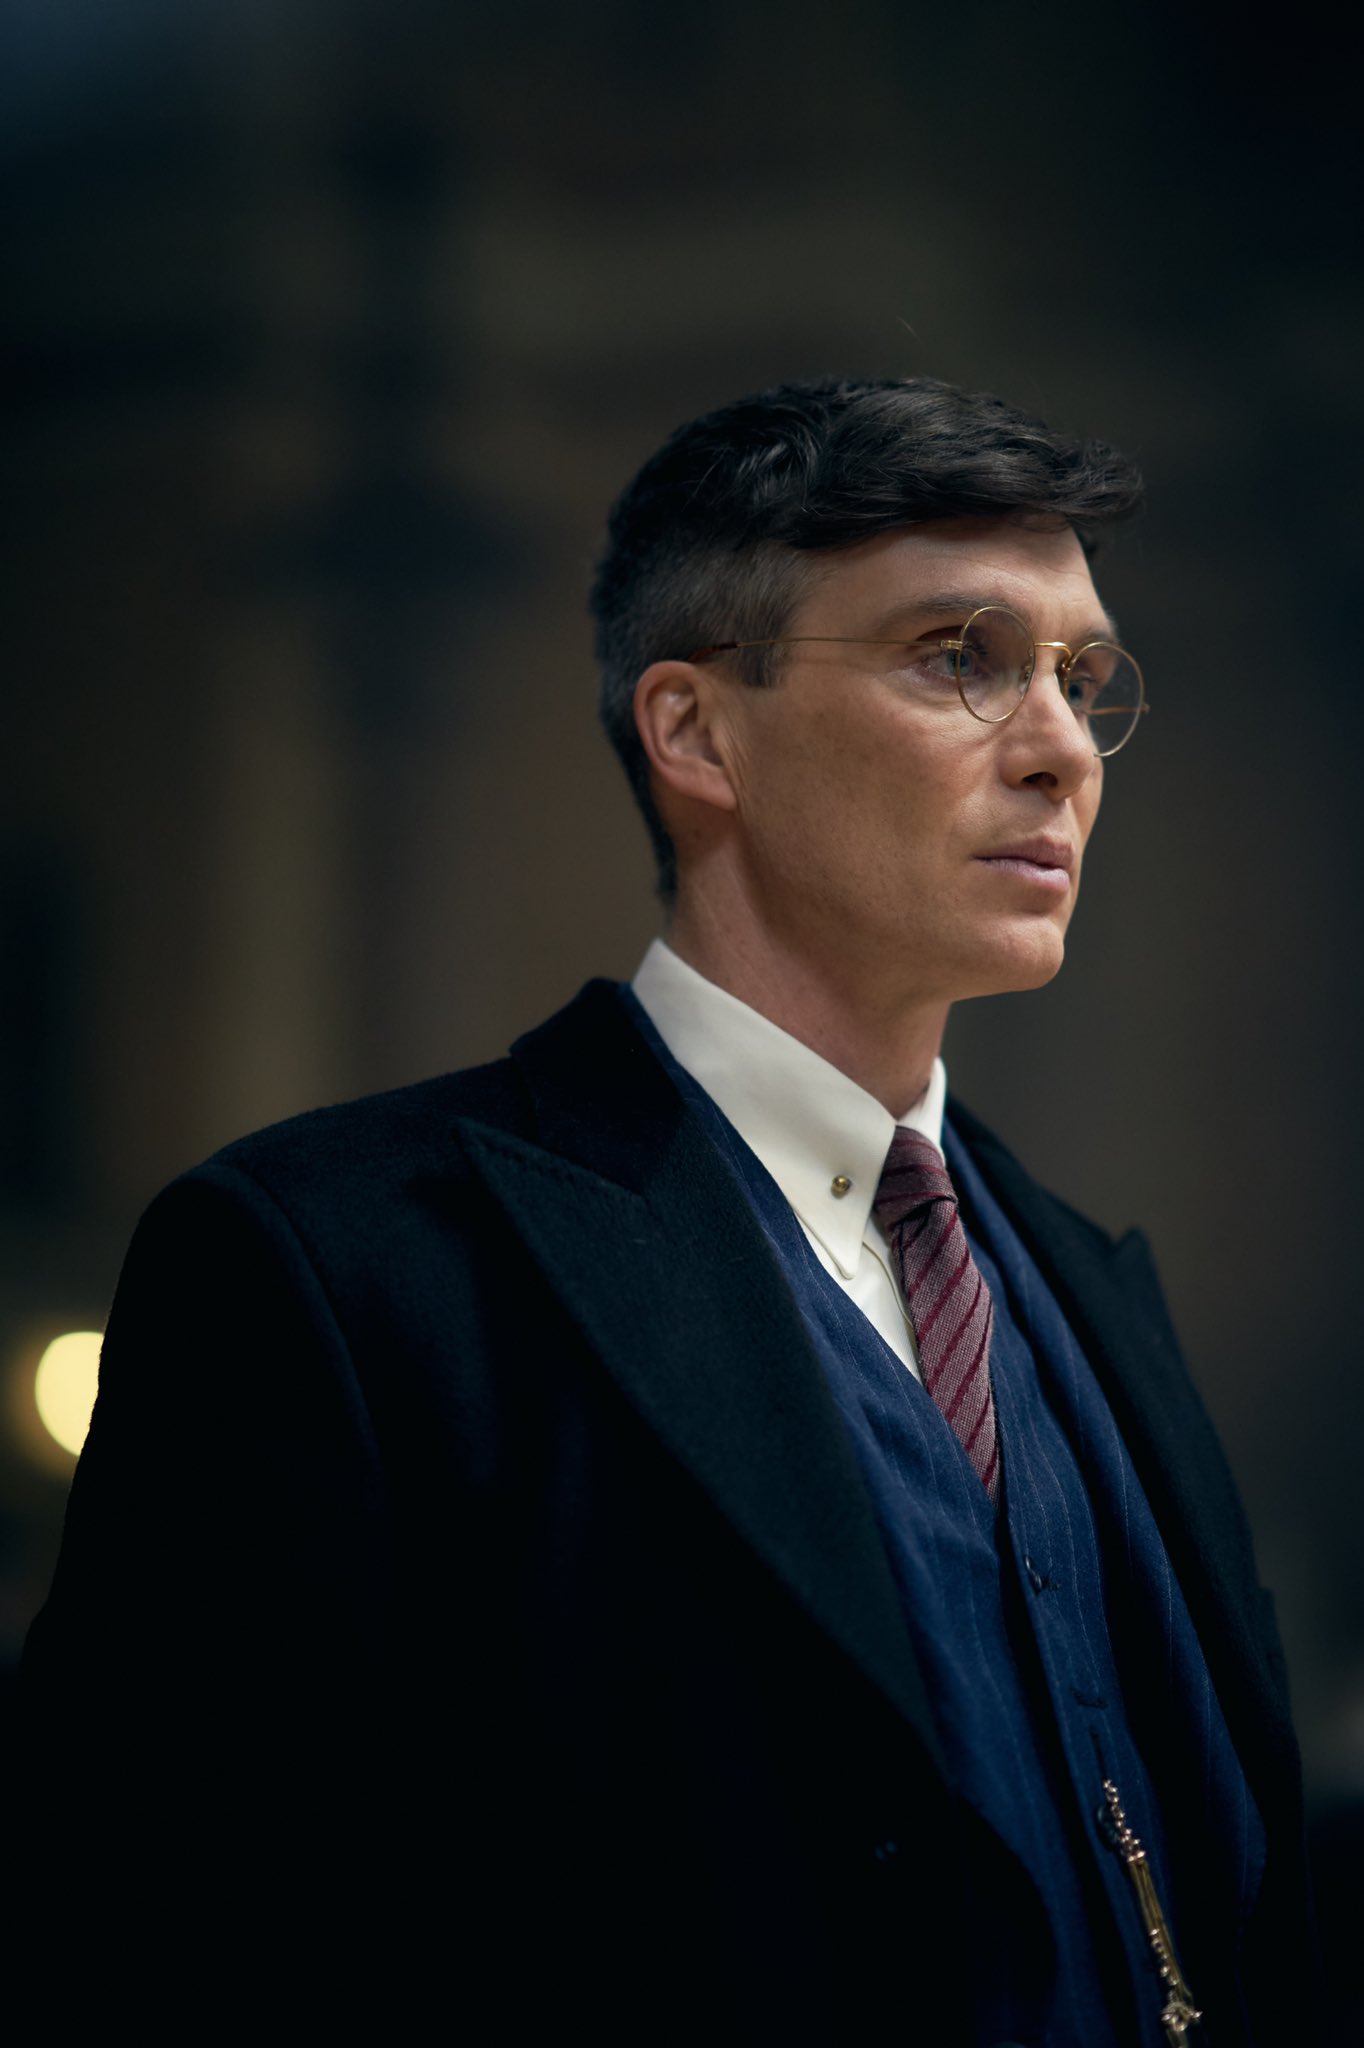 Peaky Blinders on X: “I have no limitations” Cillian Murphy has won the  Best Actor Award for his role as Tommy Shelby in series six of Peaky  Blinders at the #tvchoiceawards! Thank